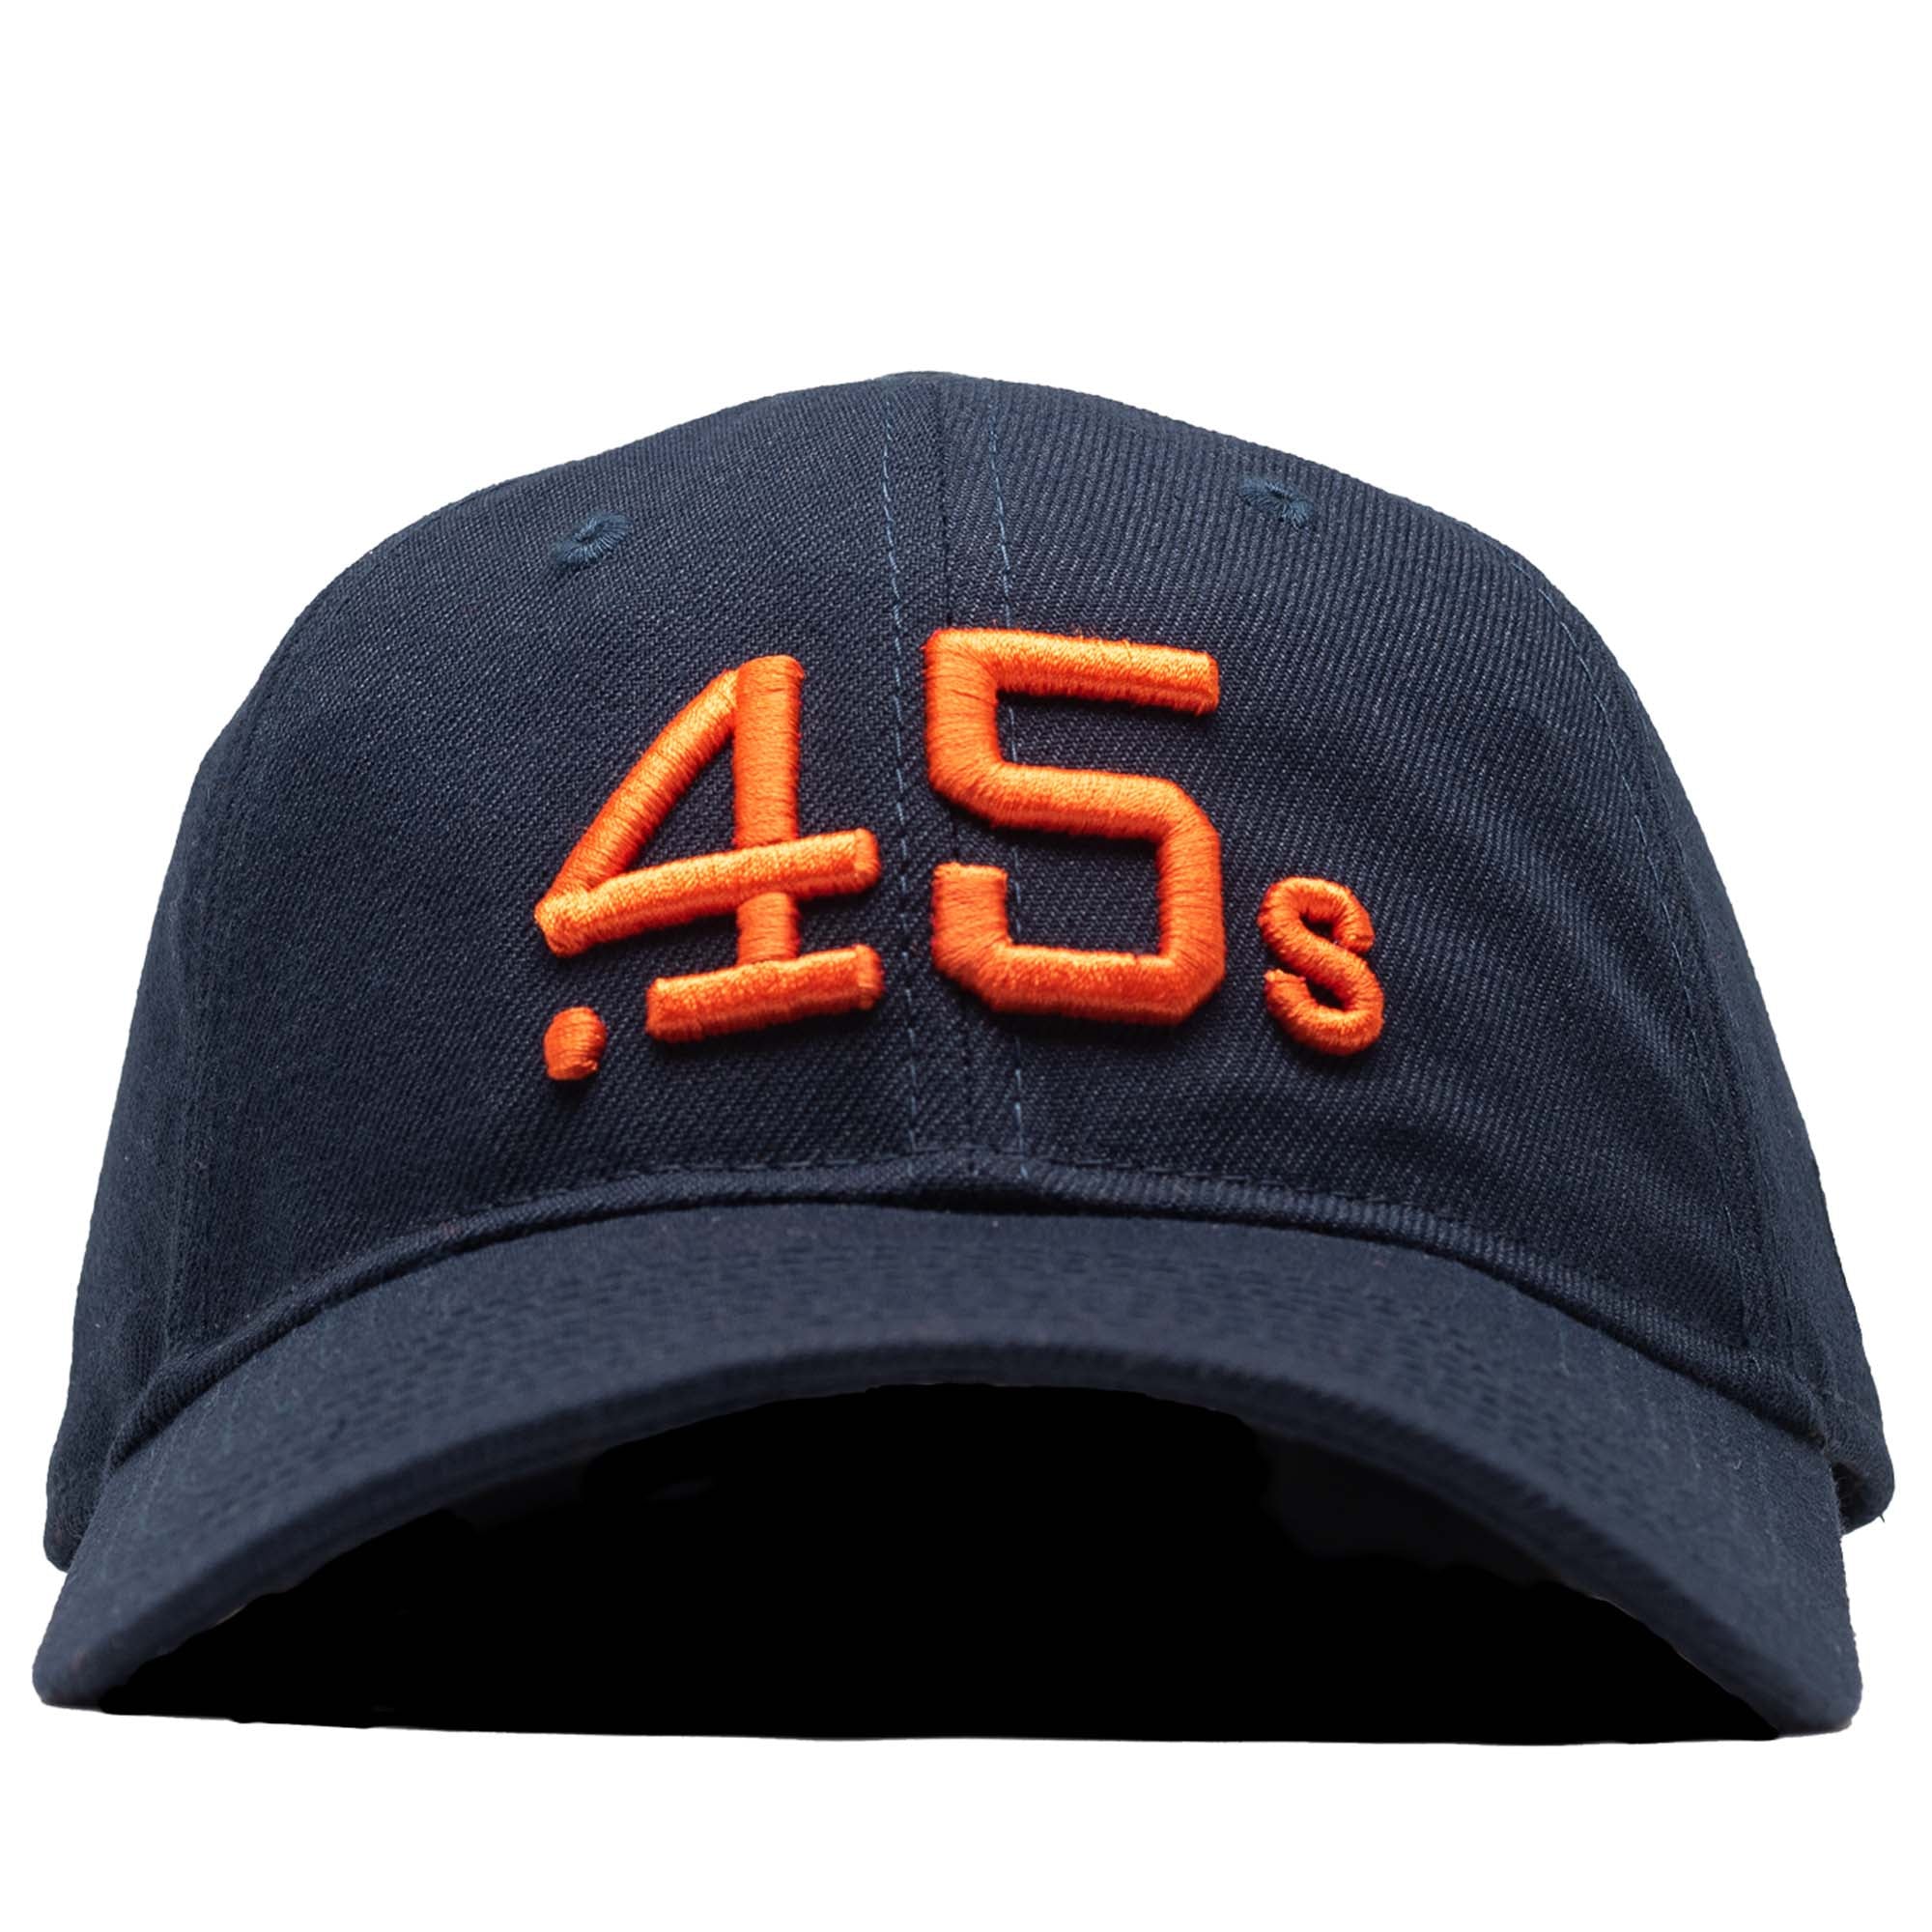 Houston Astros '47 Team Franchise Fitted Hat - Navy